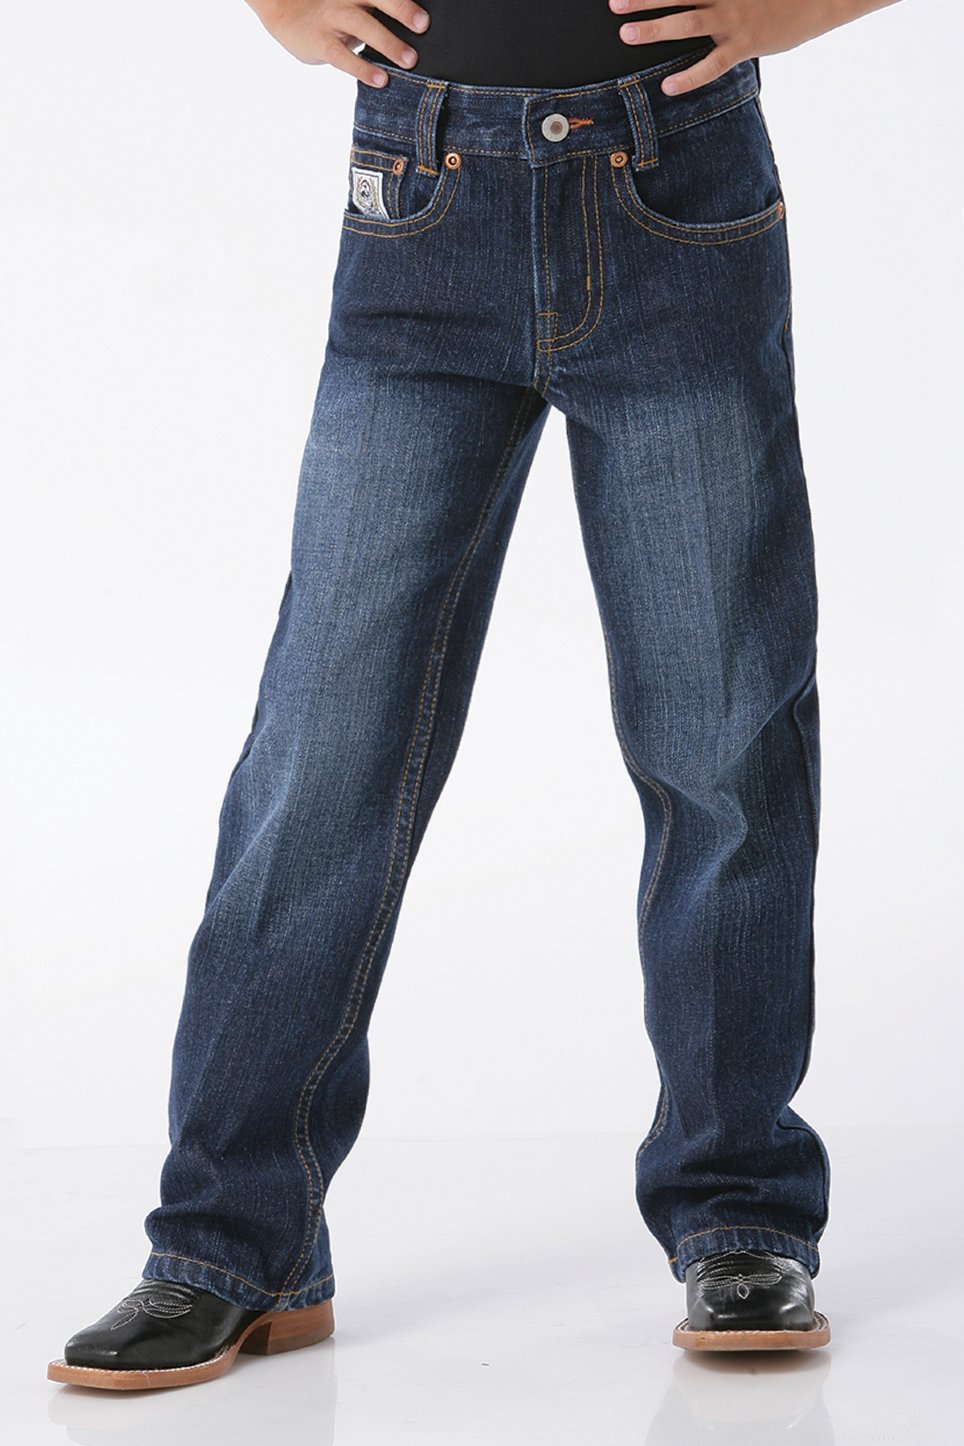 Cinch Boys White Label Slim Fit Jeans - Dark Wash - MB12841002 and MB12820002